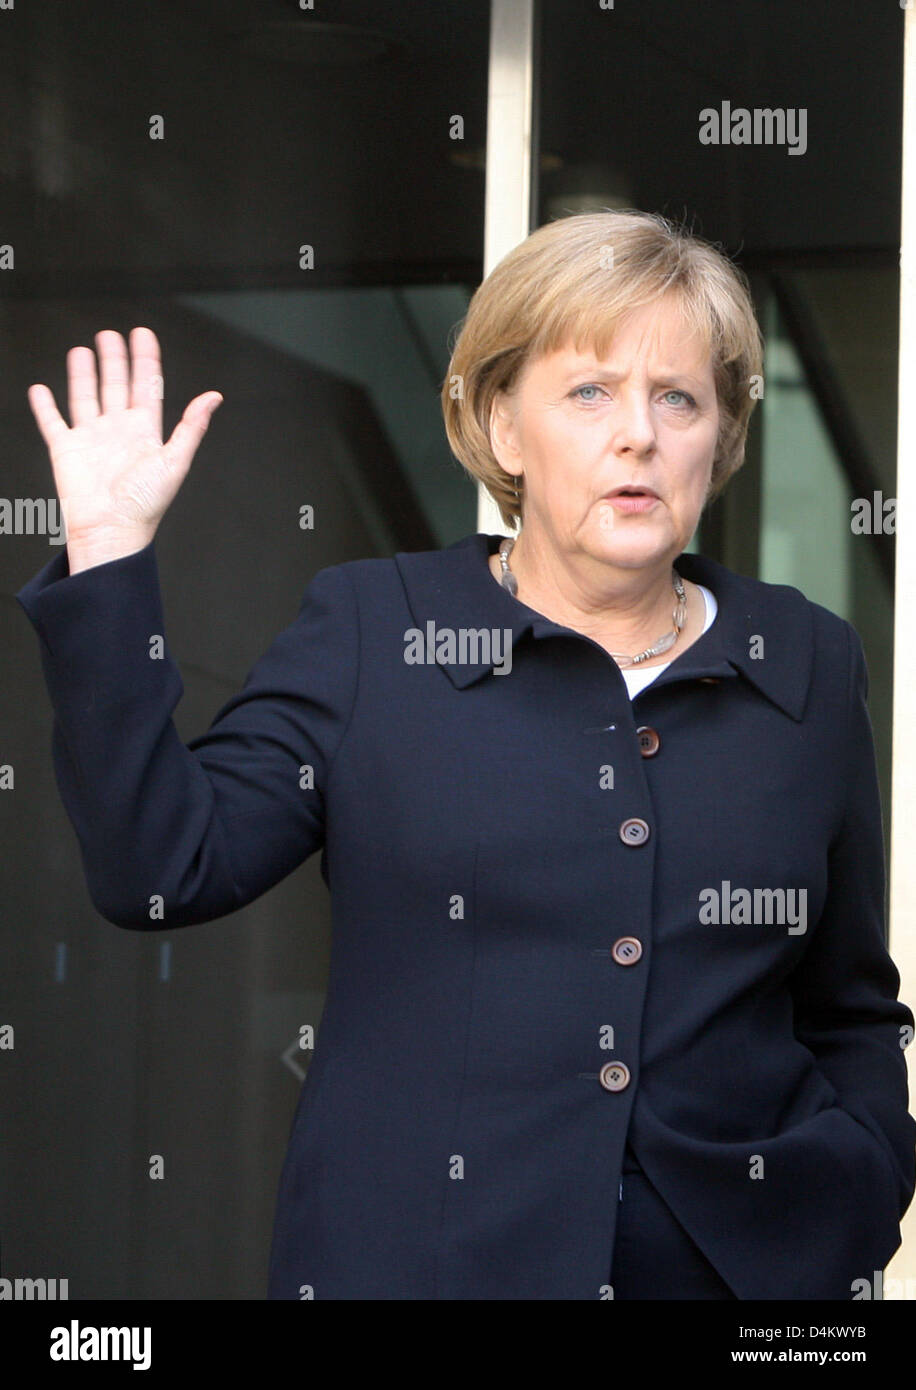 German Chancellor Angela Merkel leaves after Federal German President Horst Koehler is reelected by the 13th Federal Convention in the plenar hall of the Reichstag building in Berlin, Germany, 23 May 2009. Koehler won the election with 613 votes, the minimum number of necessary votes. Photo: ALINA NOVOPASHINA Stock Photo